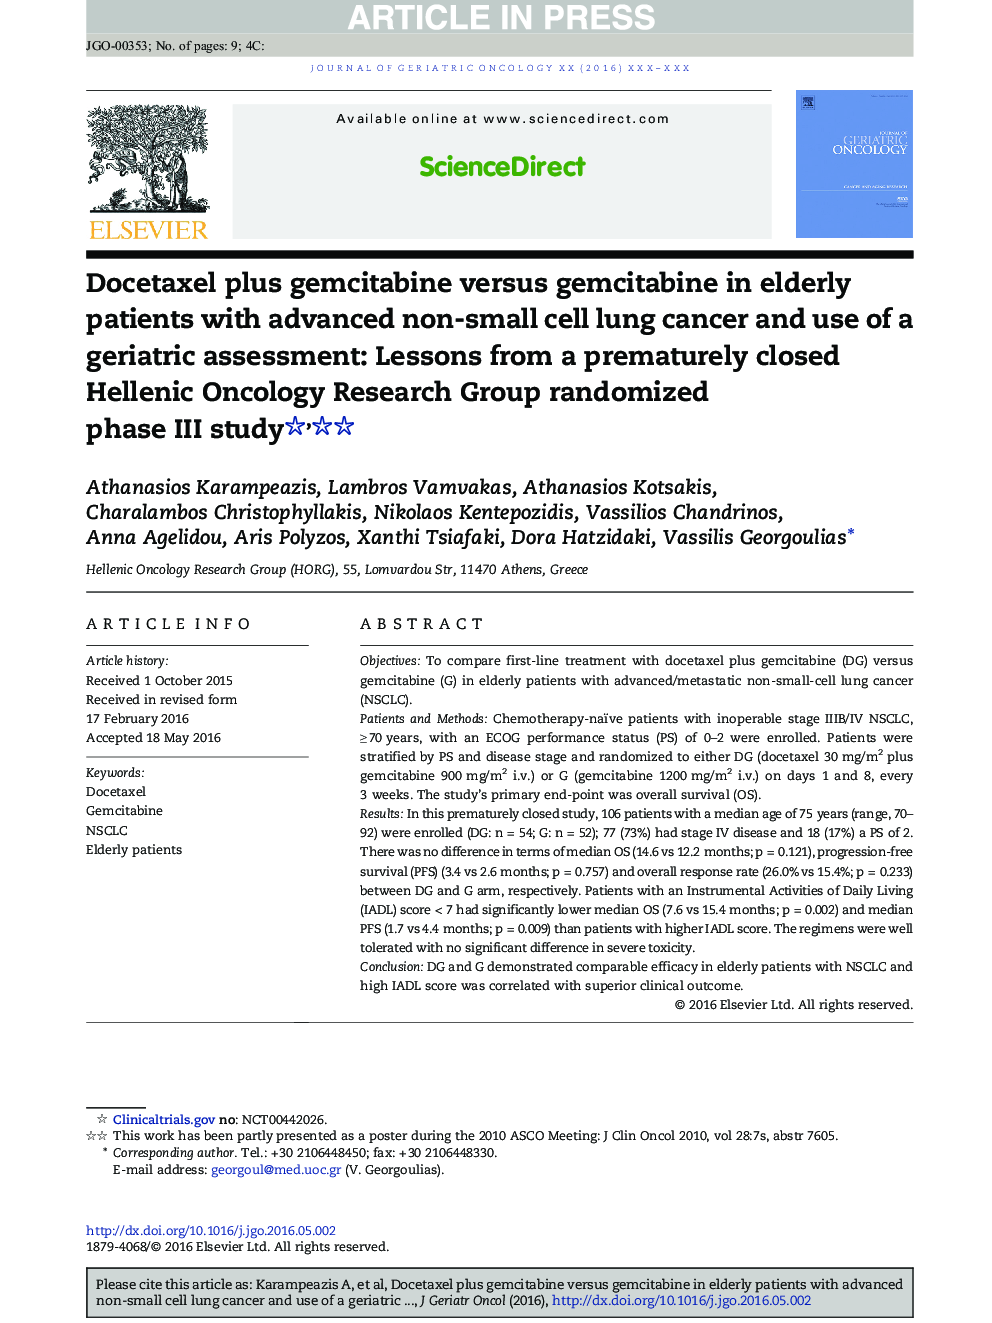 Docetaxel plus gemcitabine versus gemcitabine in elderly patients with advanced non-small cell lung cancer and use of a geriatric assessment: Lessons from a prematurely closed Hellenic Oncology Research Group randomized phase III study